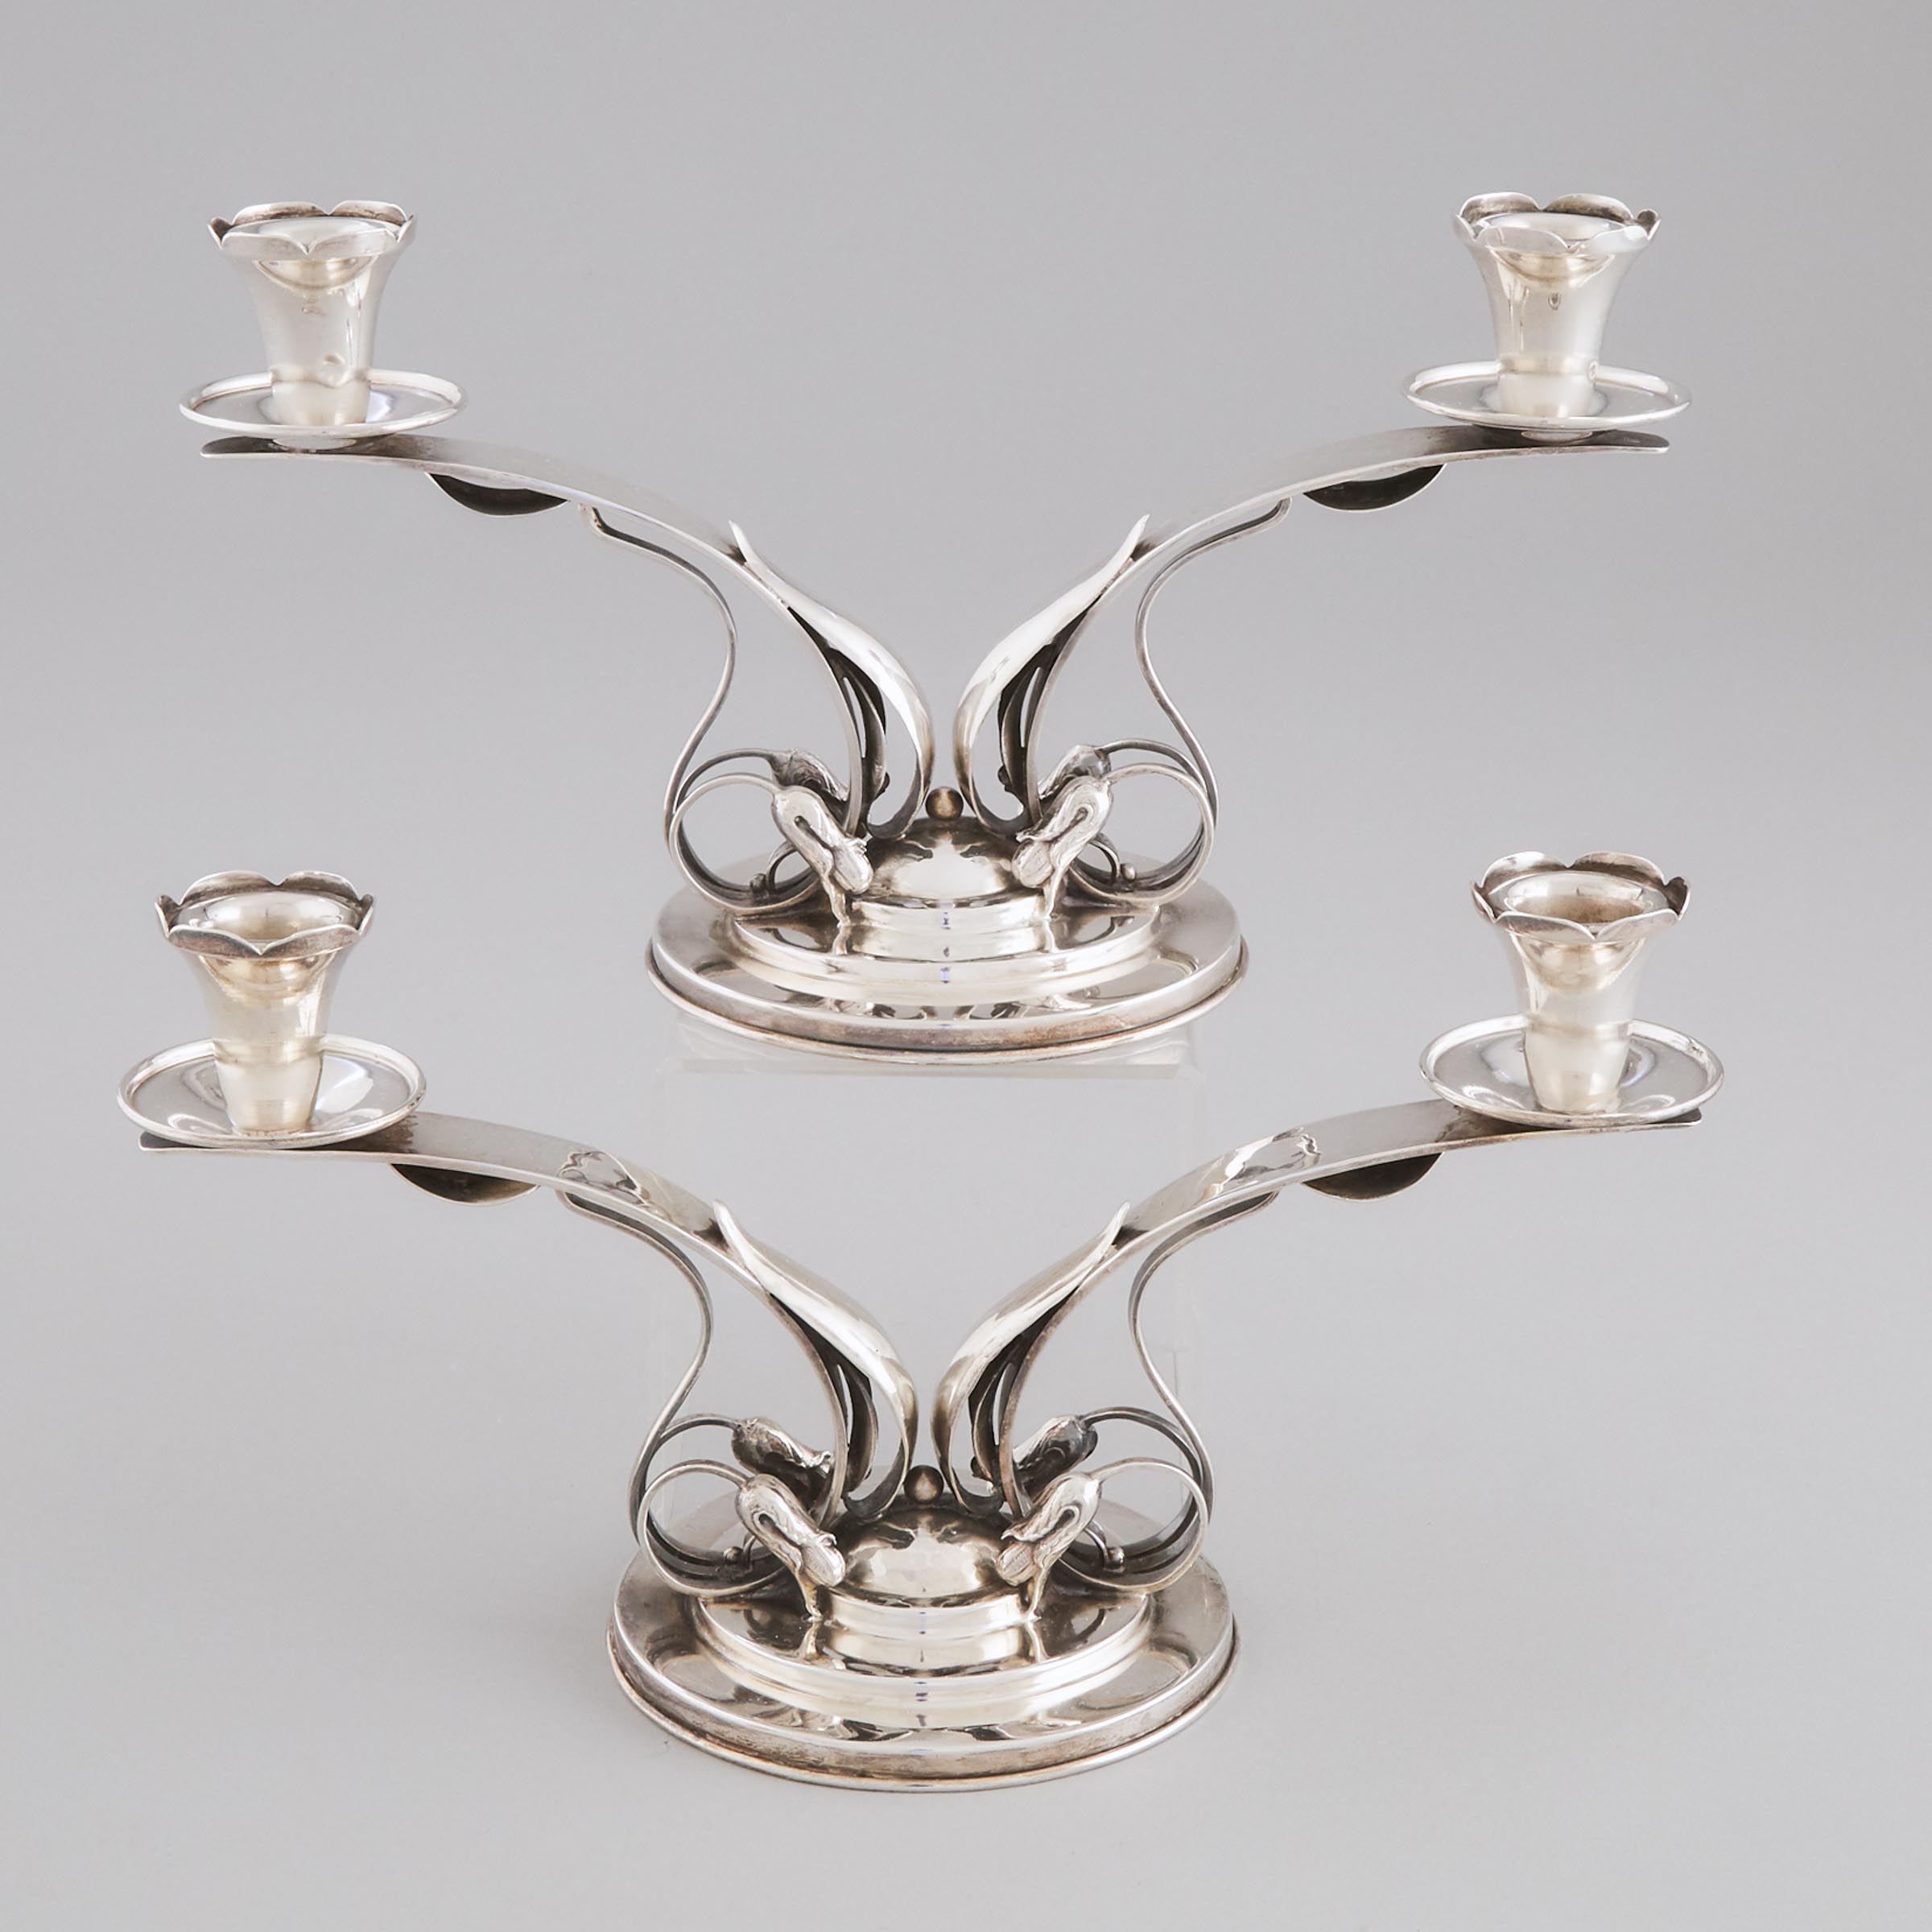 Pair of Canadian Silver Two-Light Candelabra, Carl Poul Petersen, Montreal, Que., mid-20th century